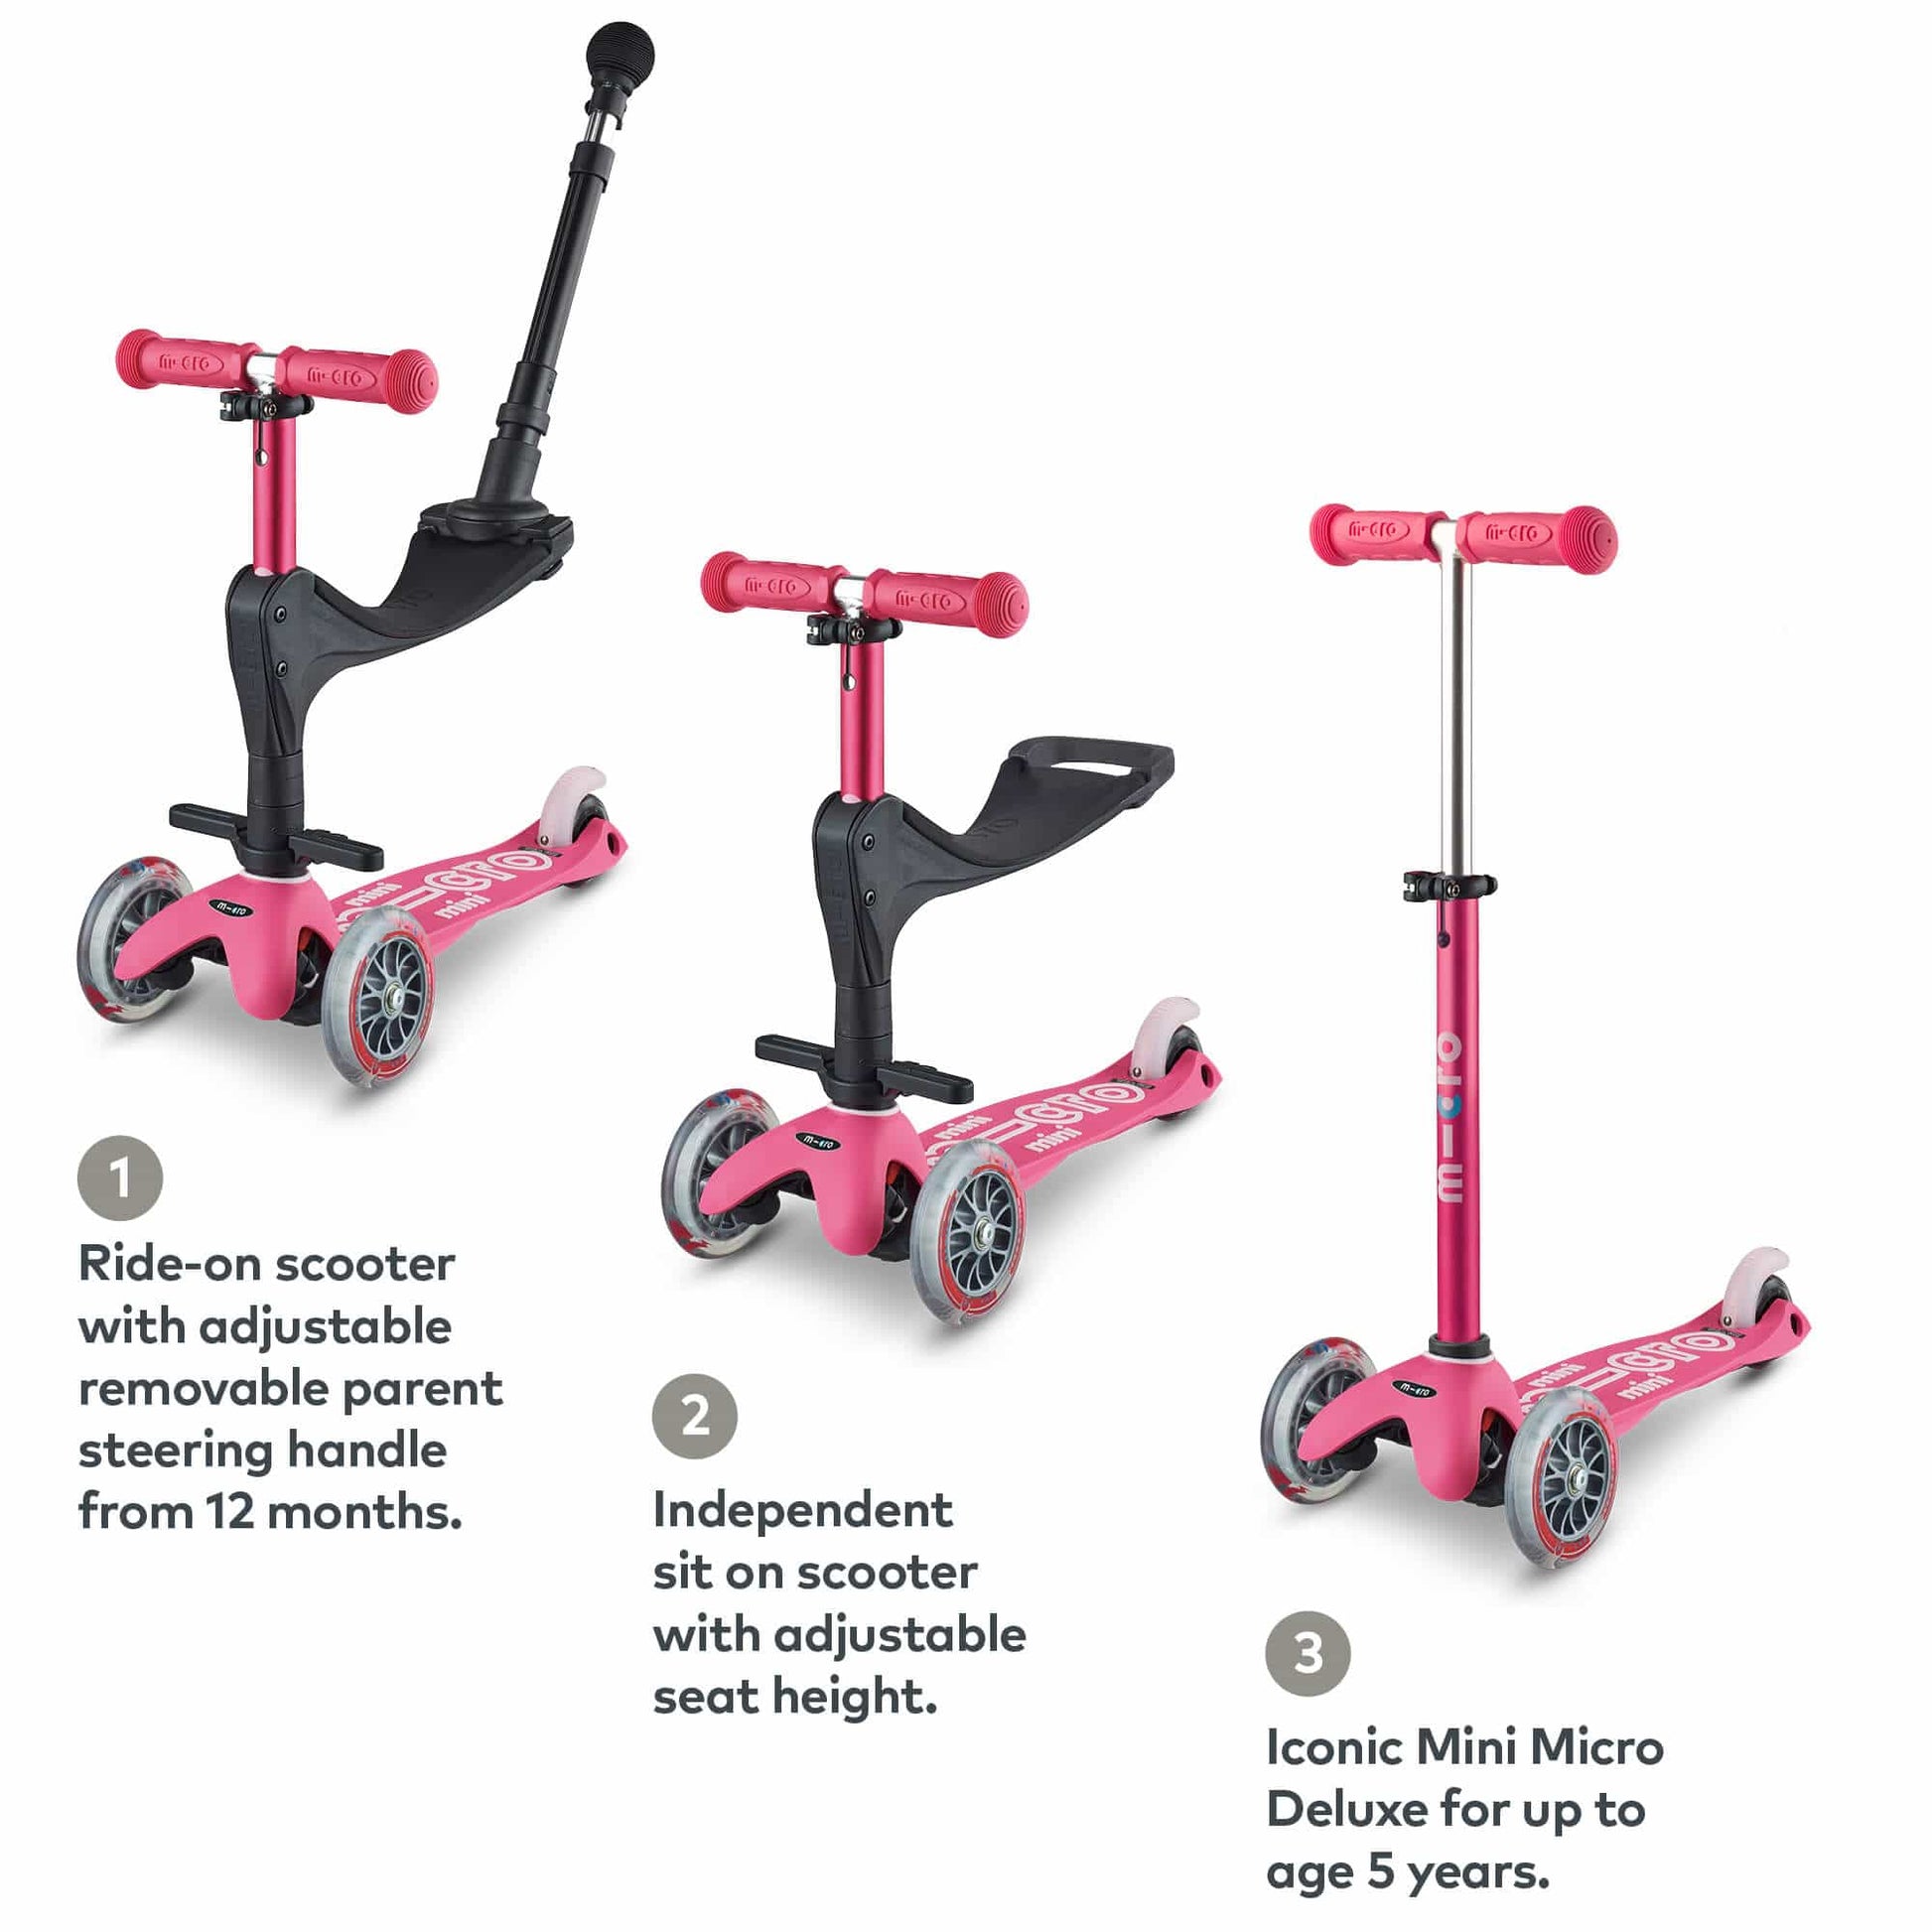 Micro Scooter Mini 3-in-1 Deluxe - Choose Your Colour - The Online Toy Shop2